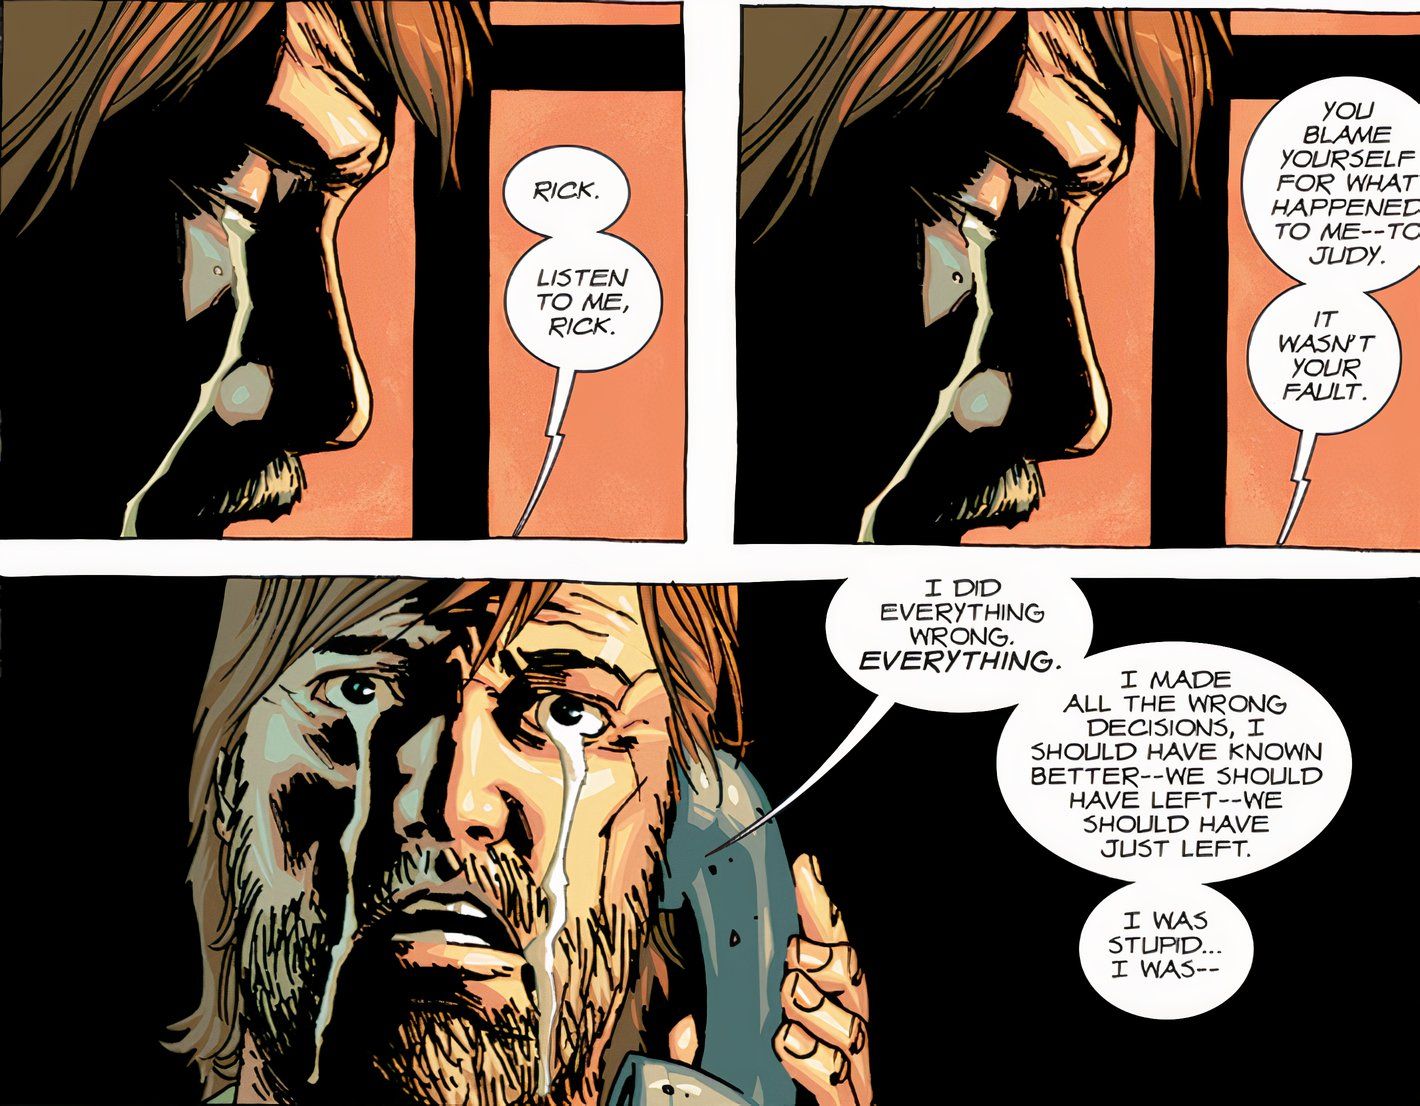 The Walking Dead Deluxe #51, Rick cries as the voice of his dead wife tells him to stop blaming himself